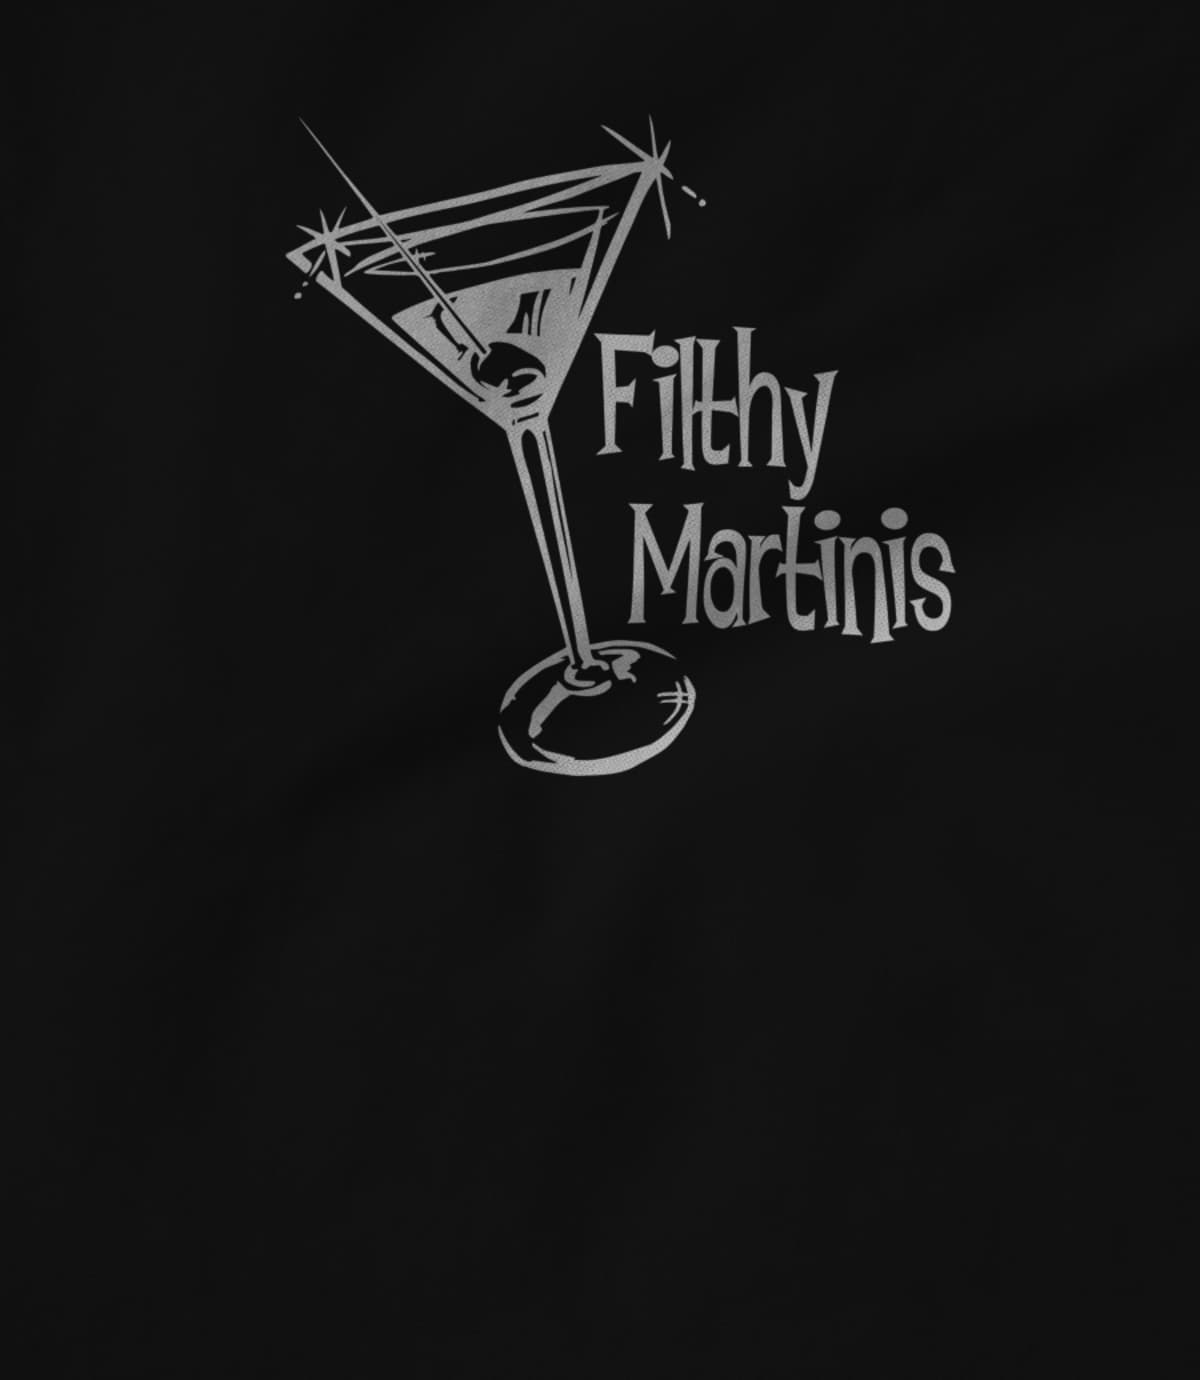 Filthy Martinis